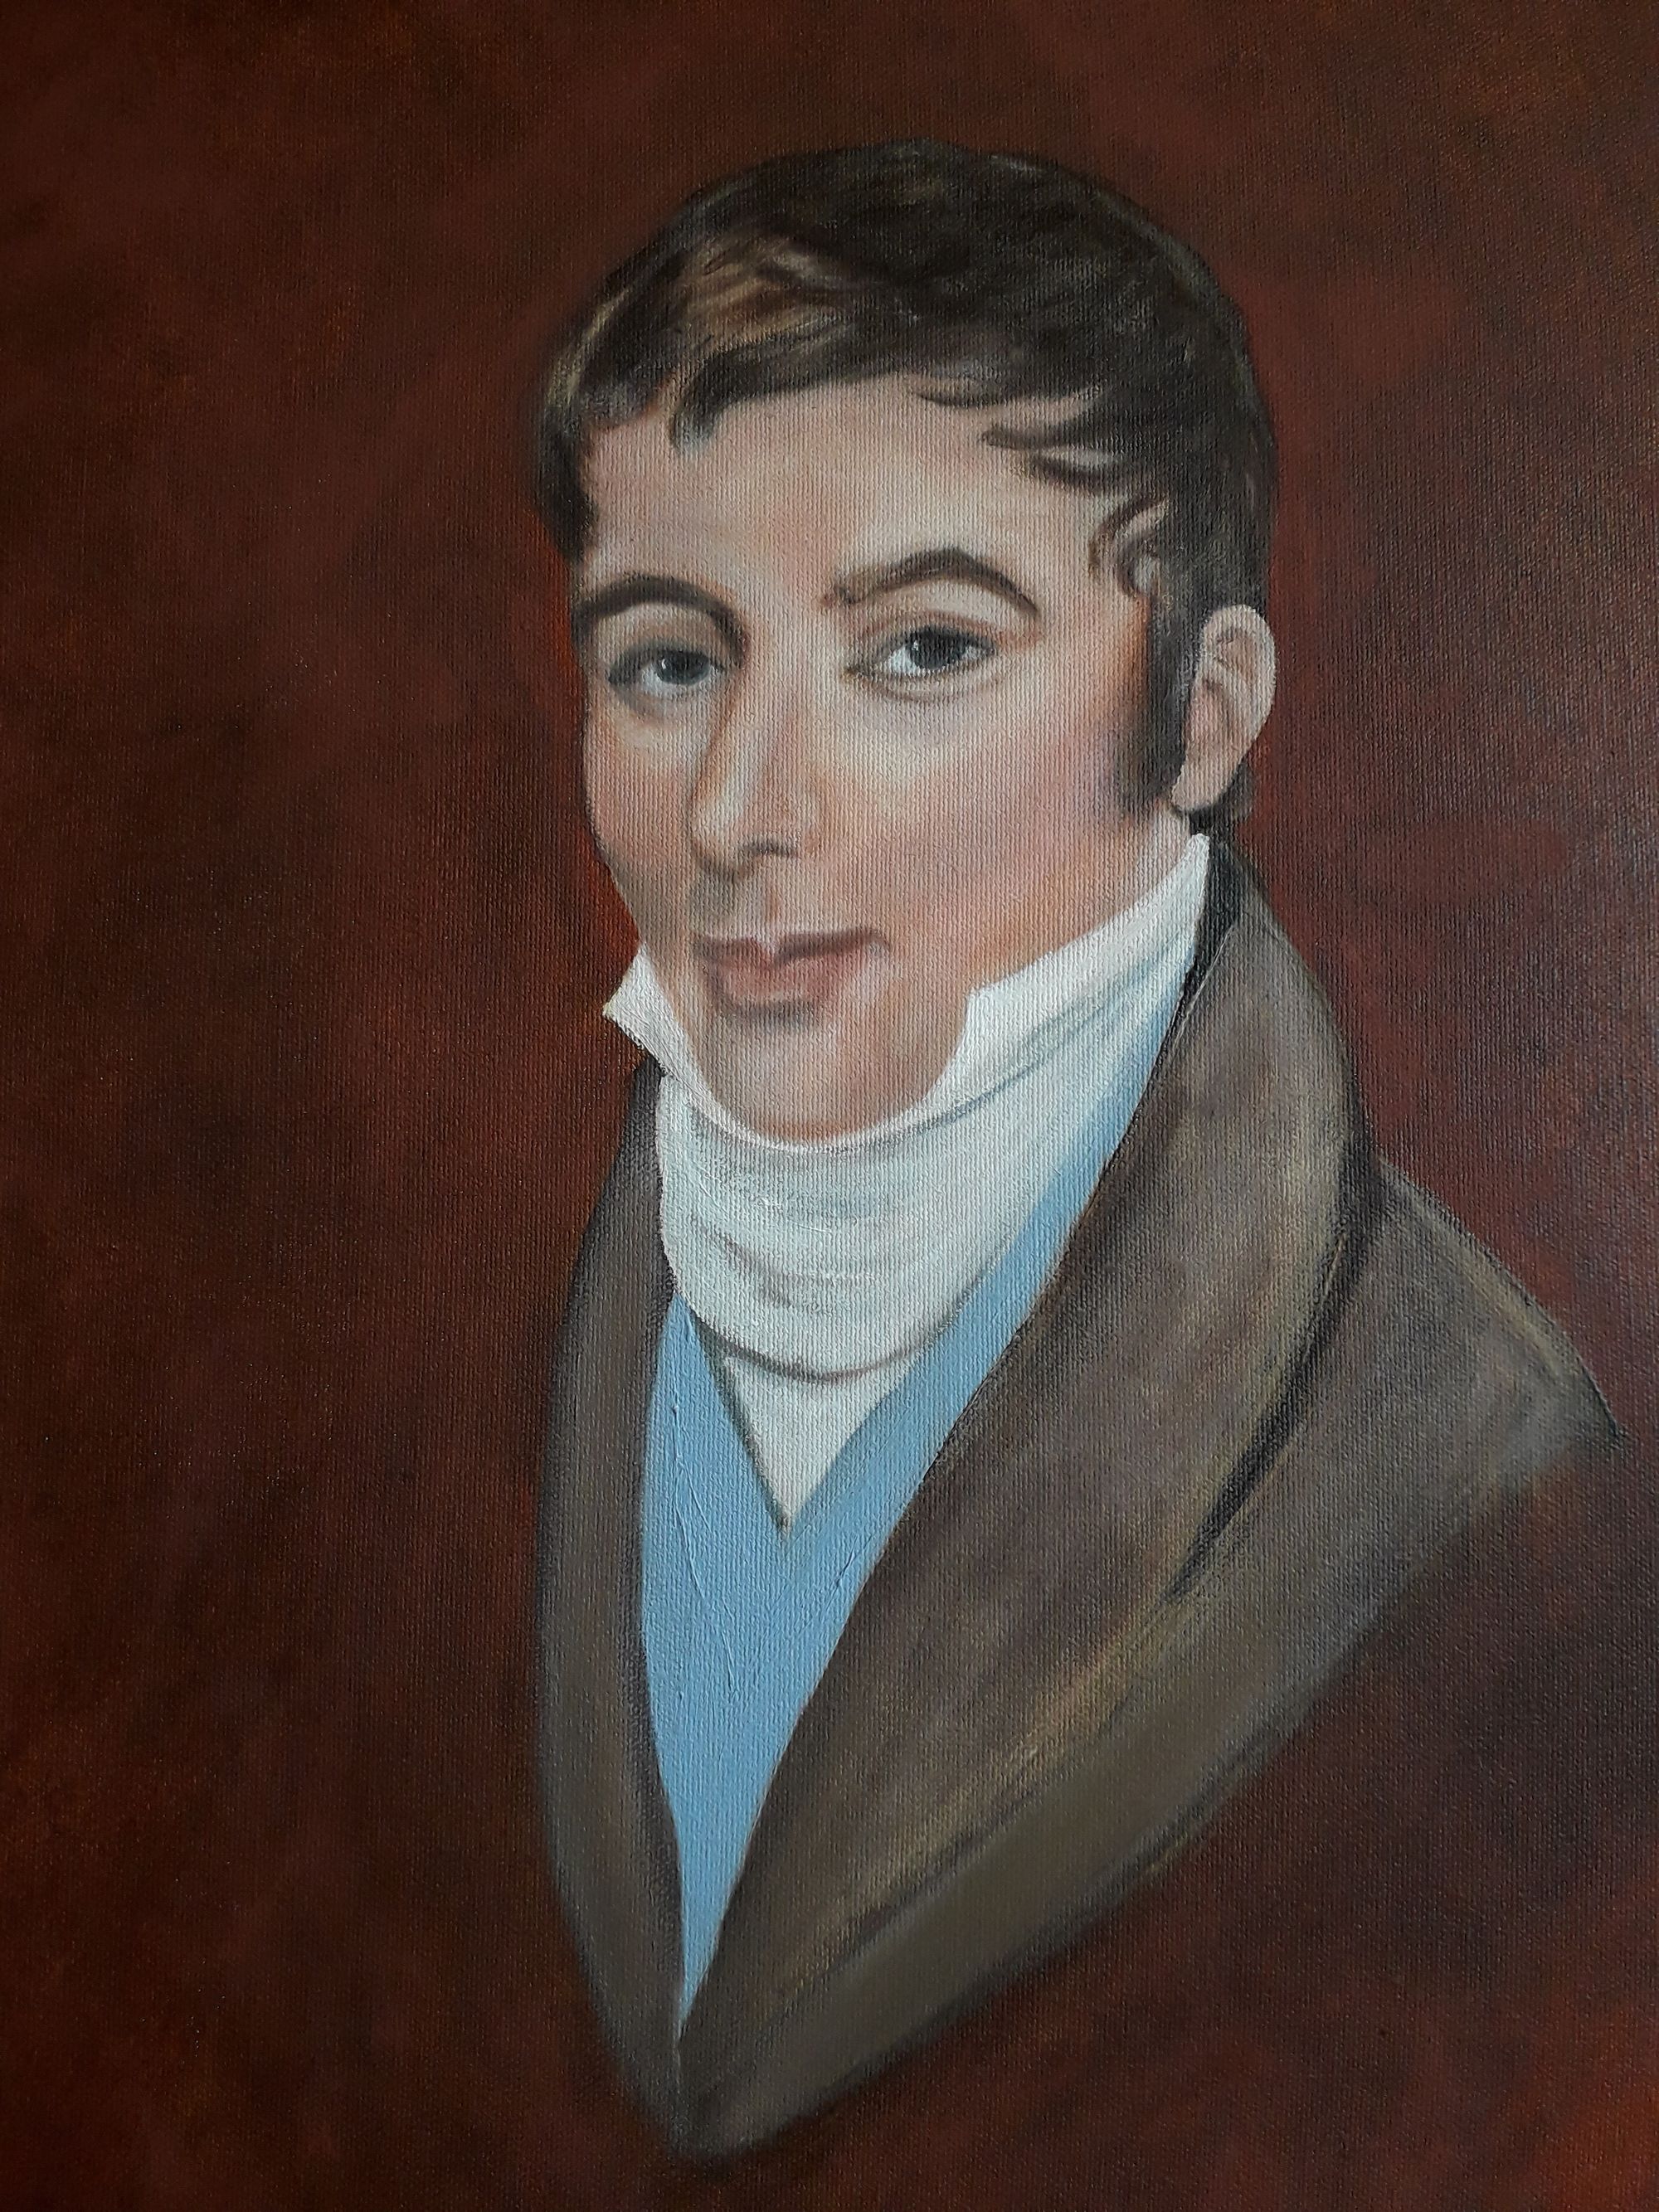 Unveiling of a new painting of Robert Owen